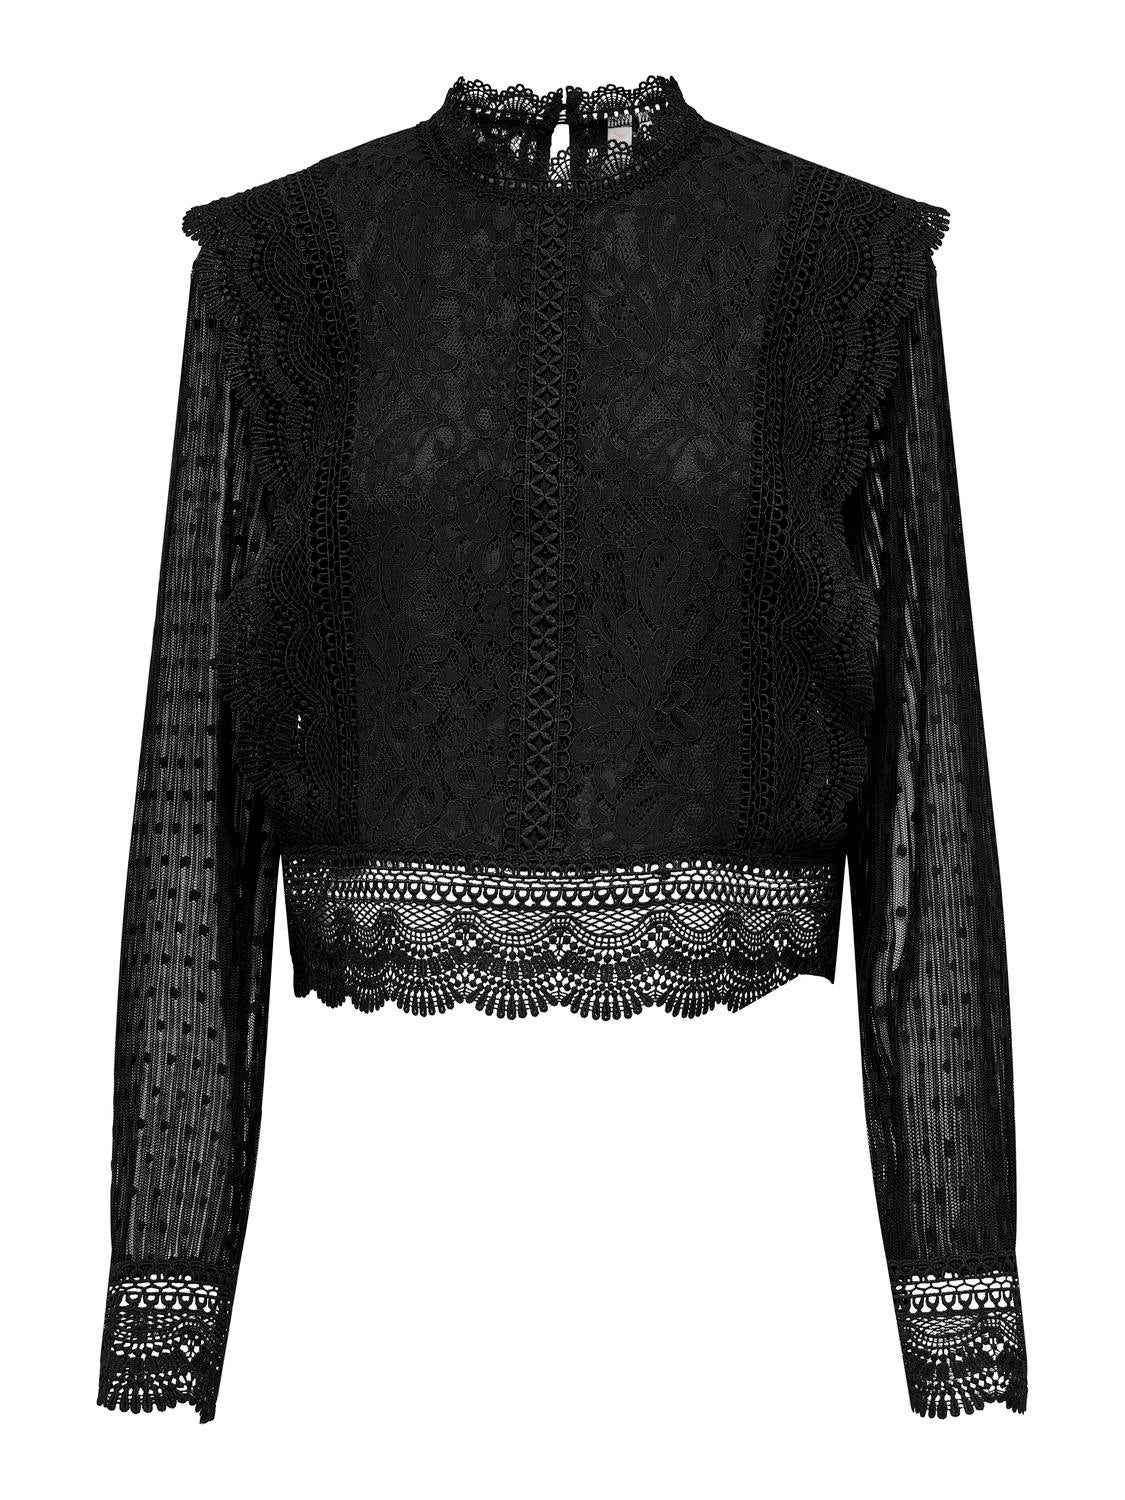 O-neck lace | ONLY® top | Black